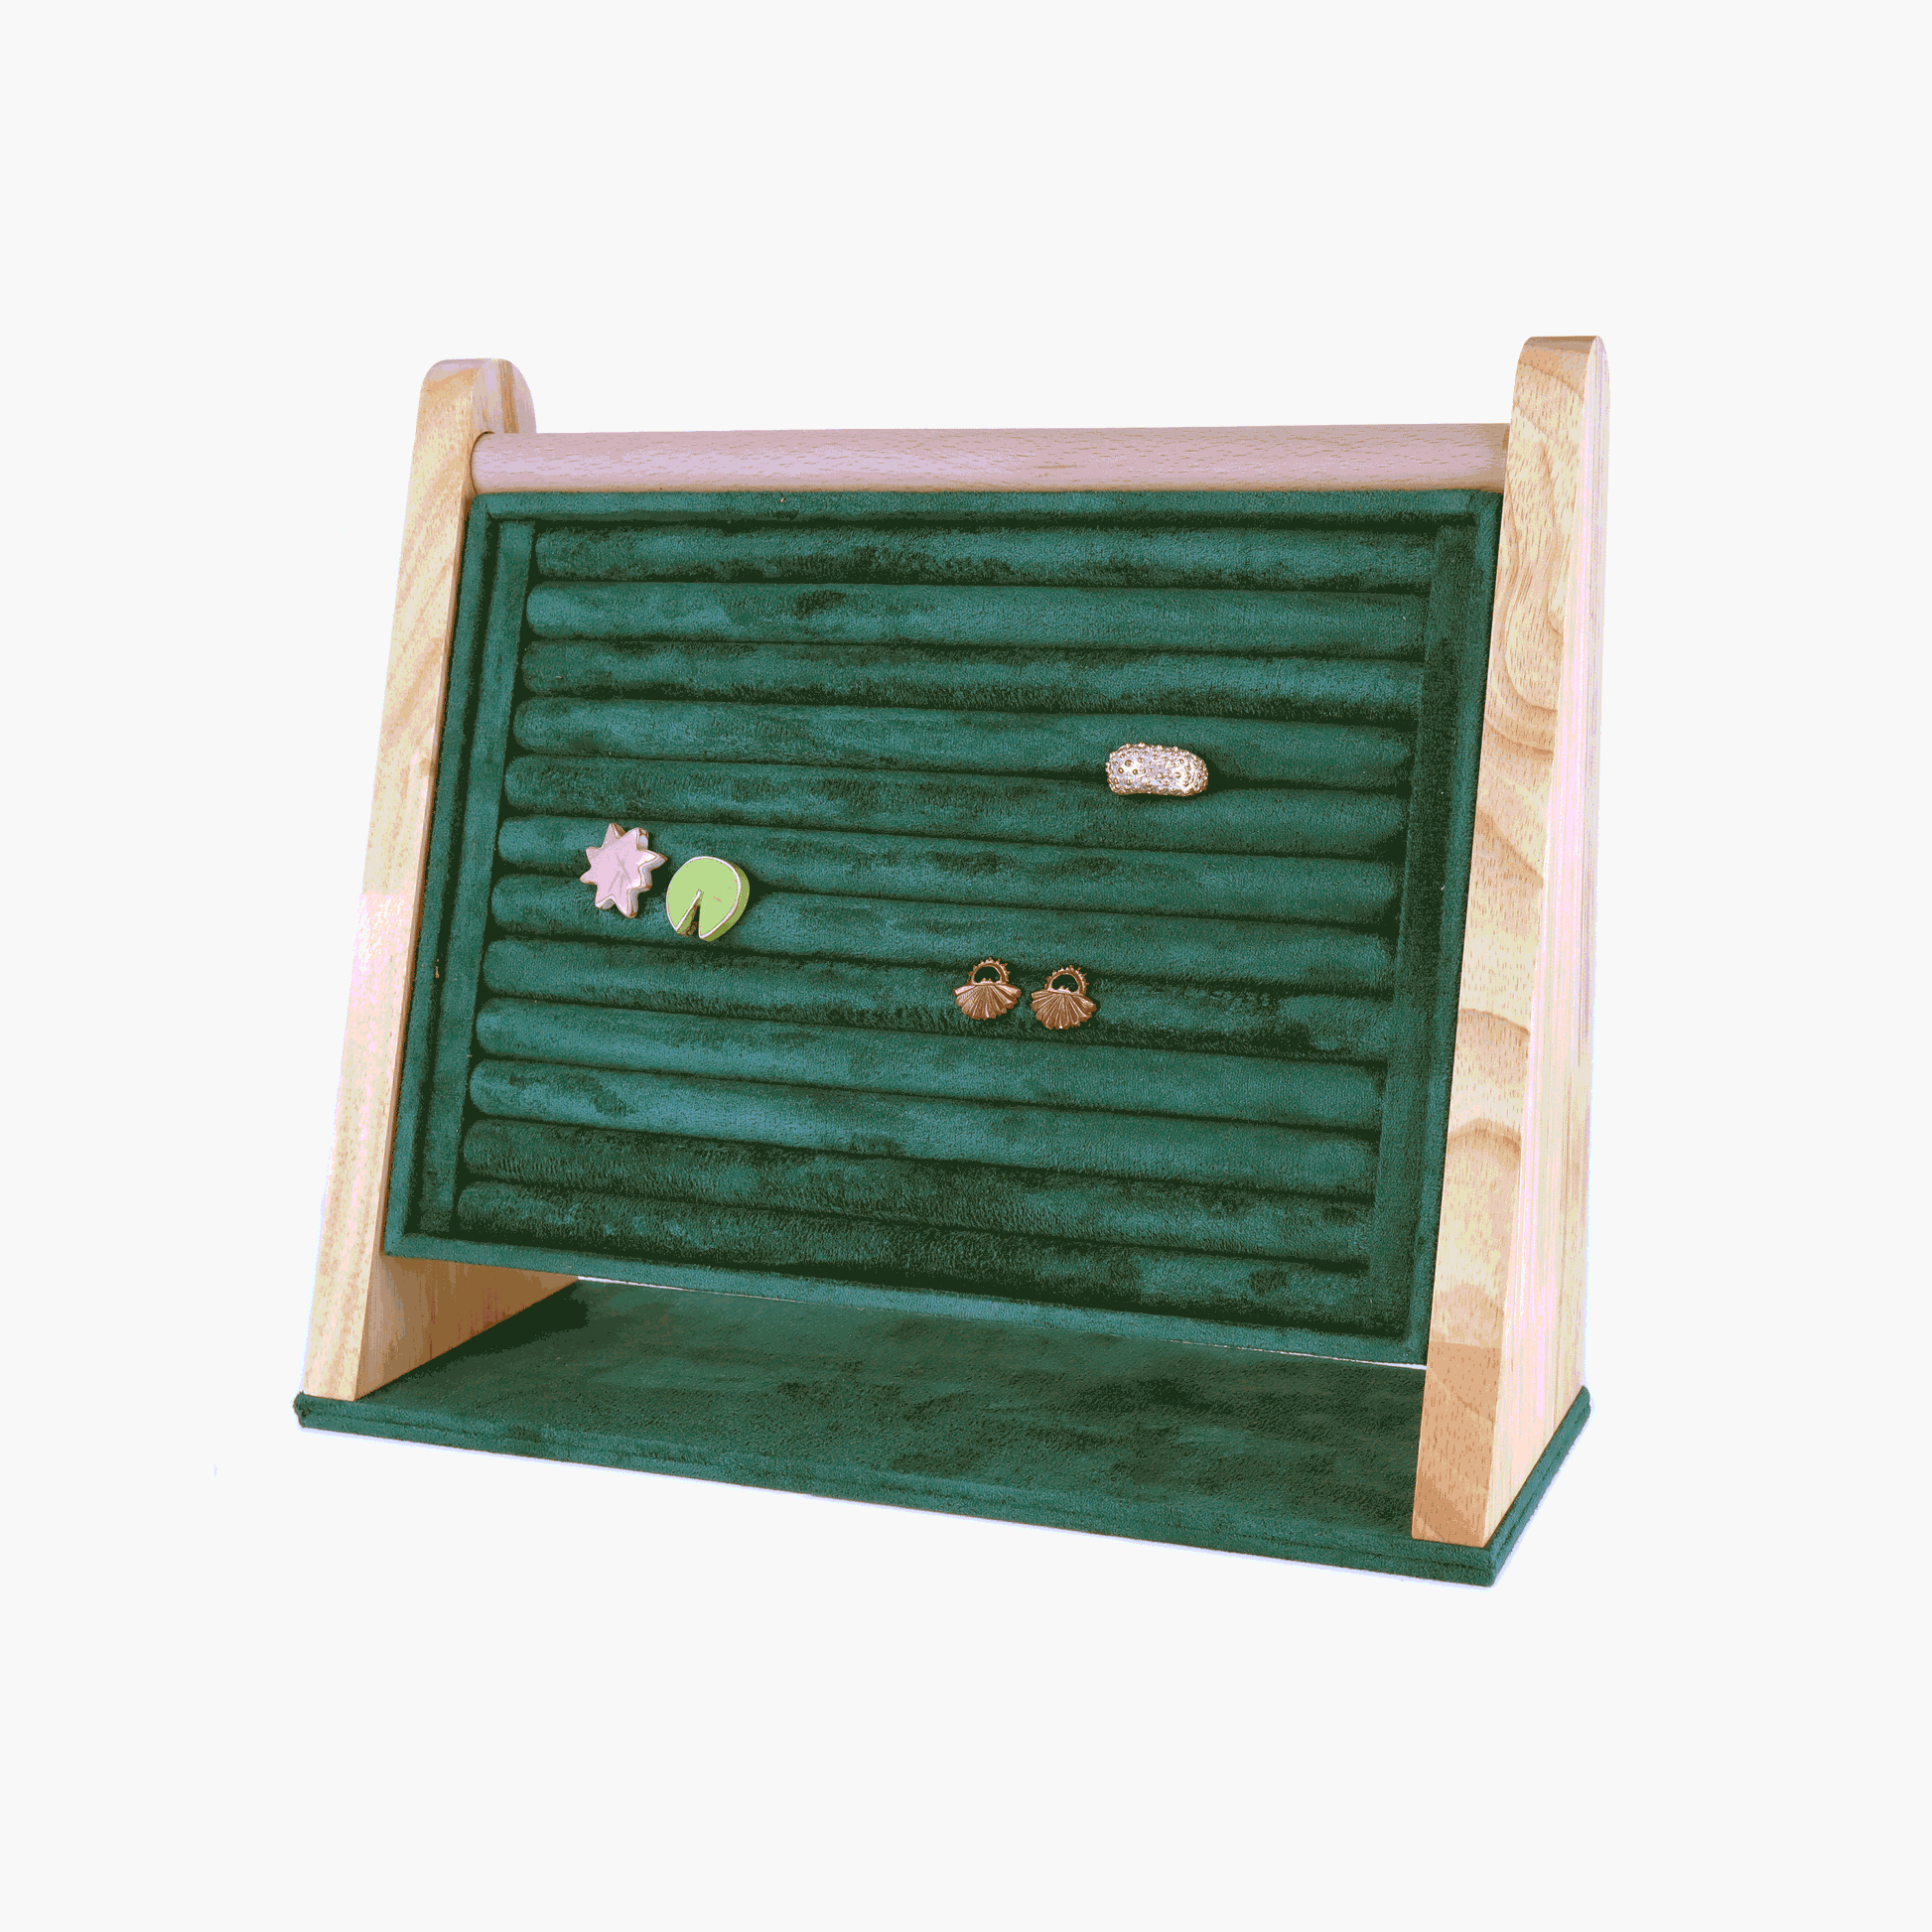 Dark green velour earring and ring display with wood frame